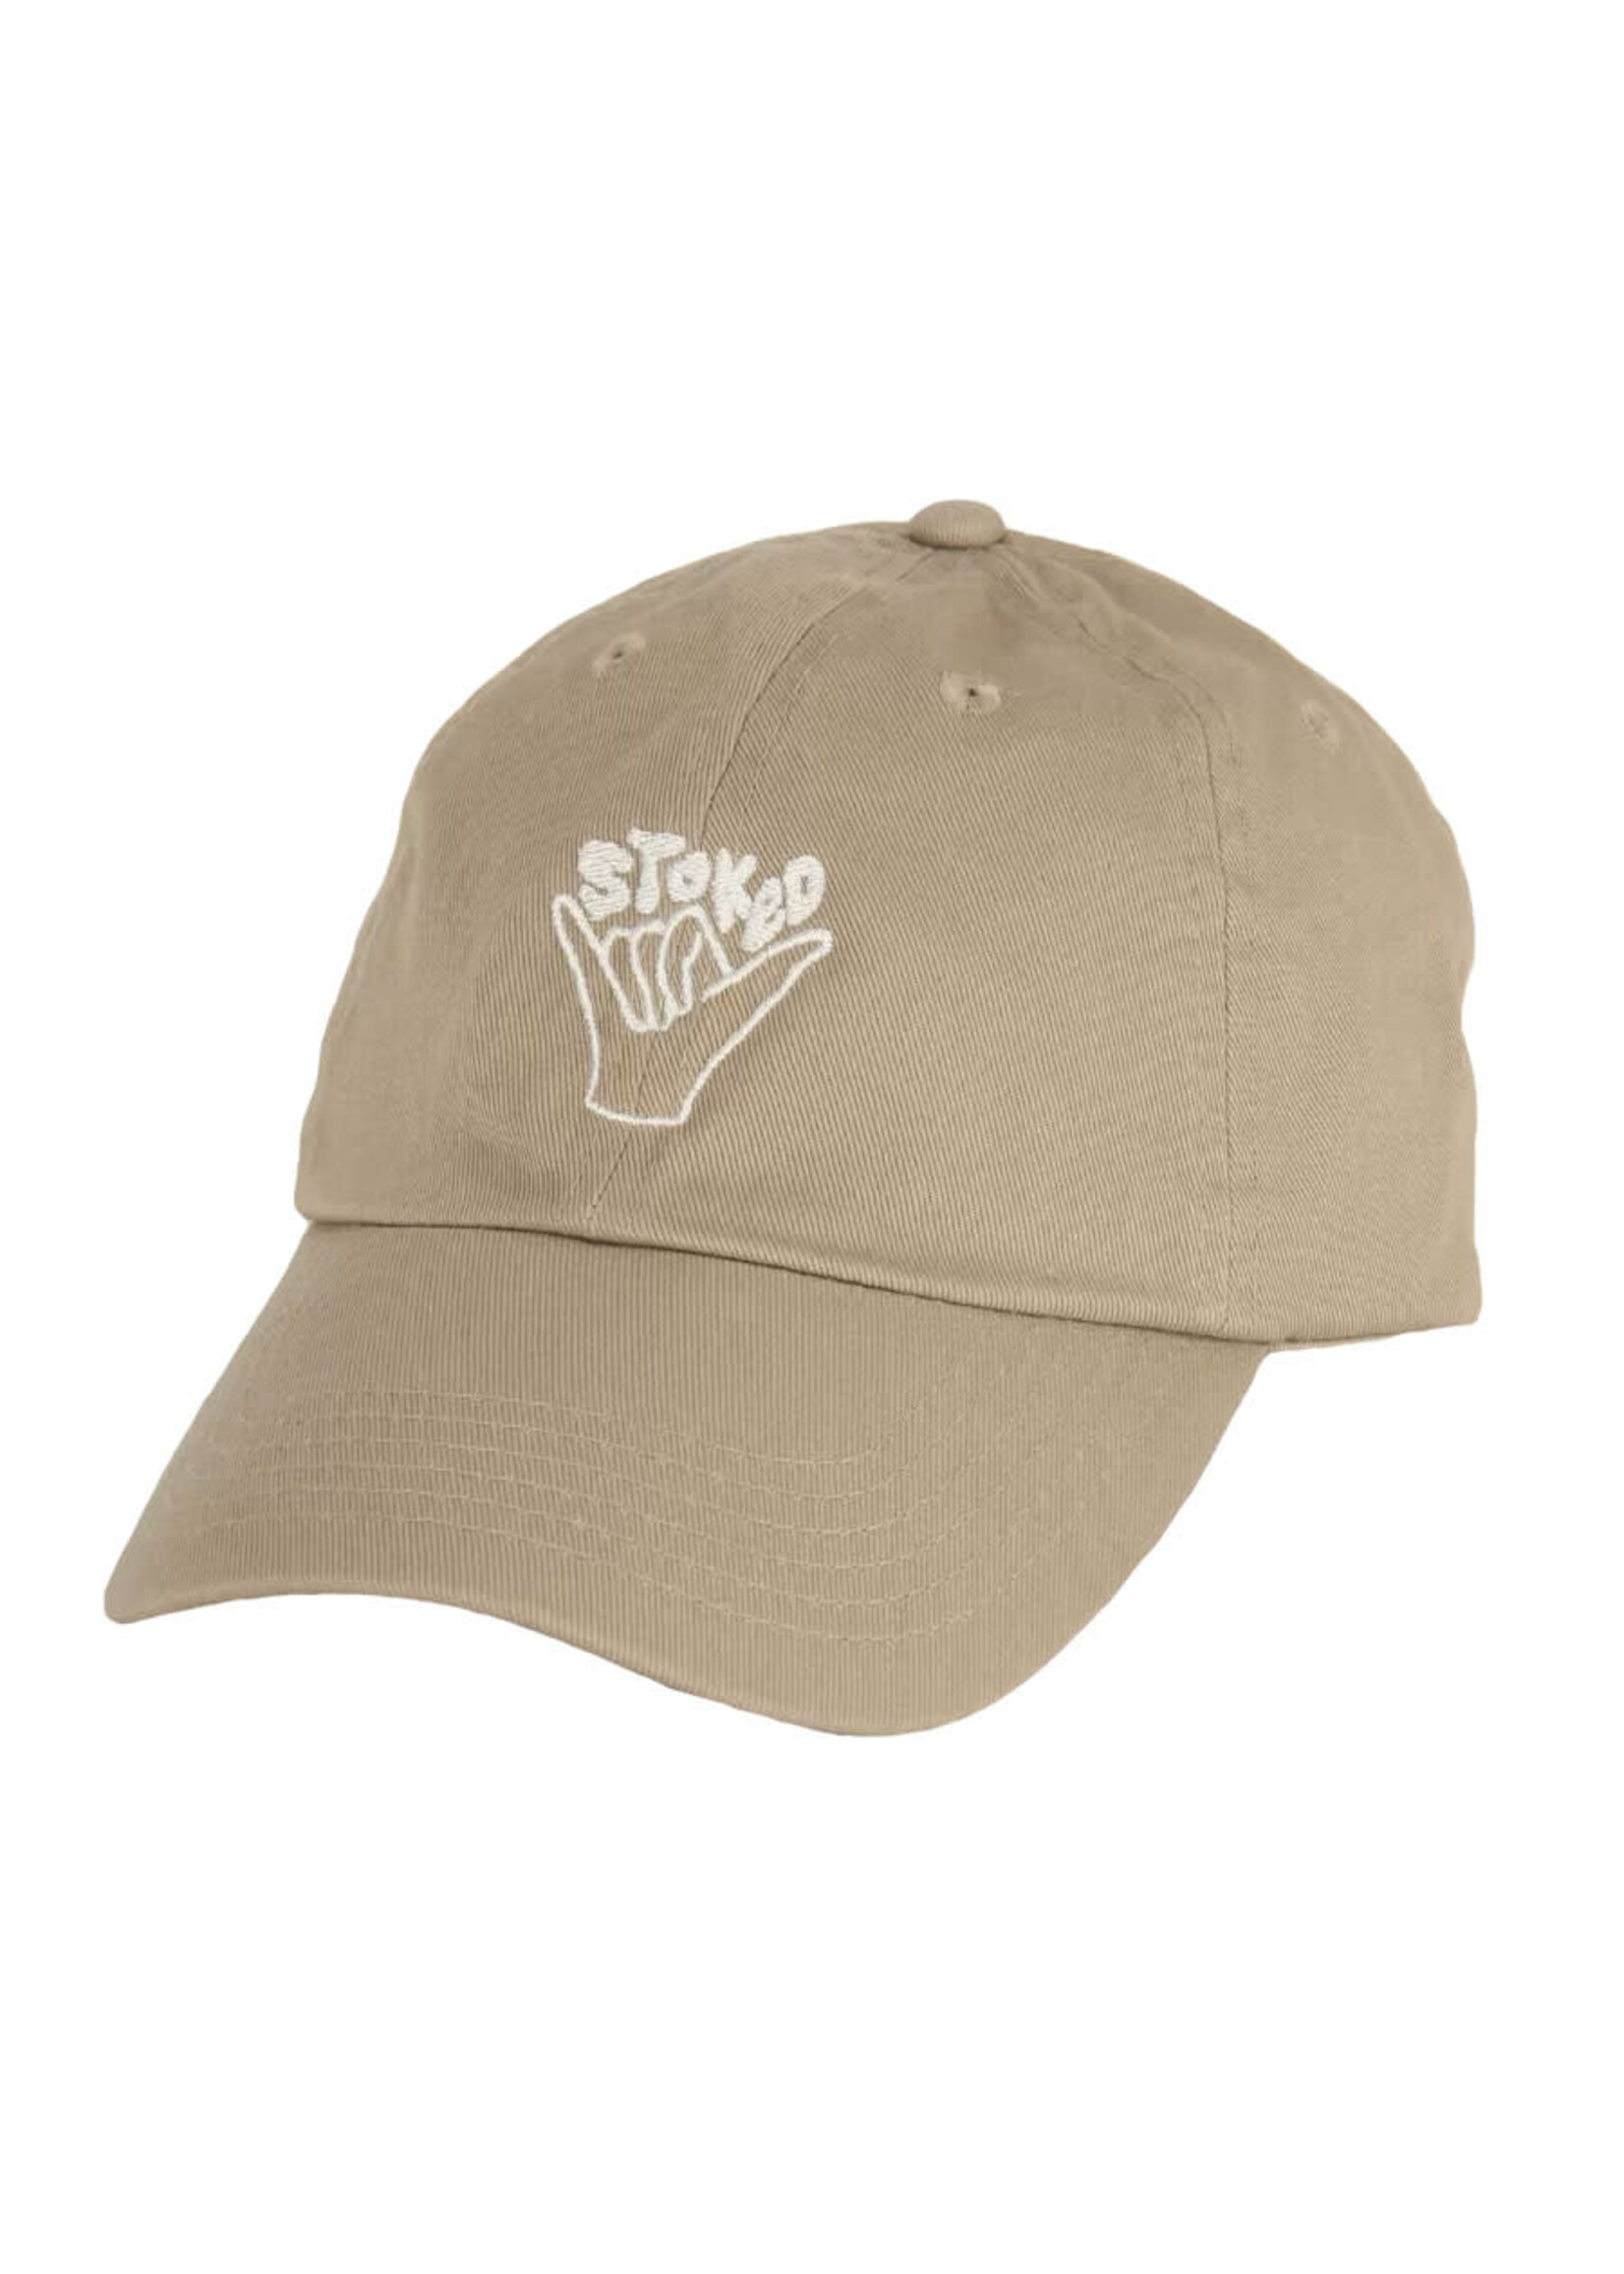 WHELK Casquette STOKED / Sable beige (Unisexe)